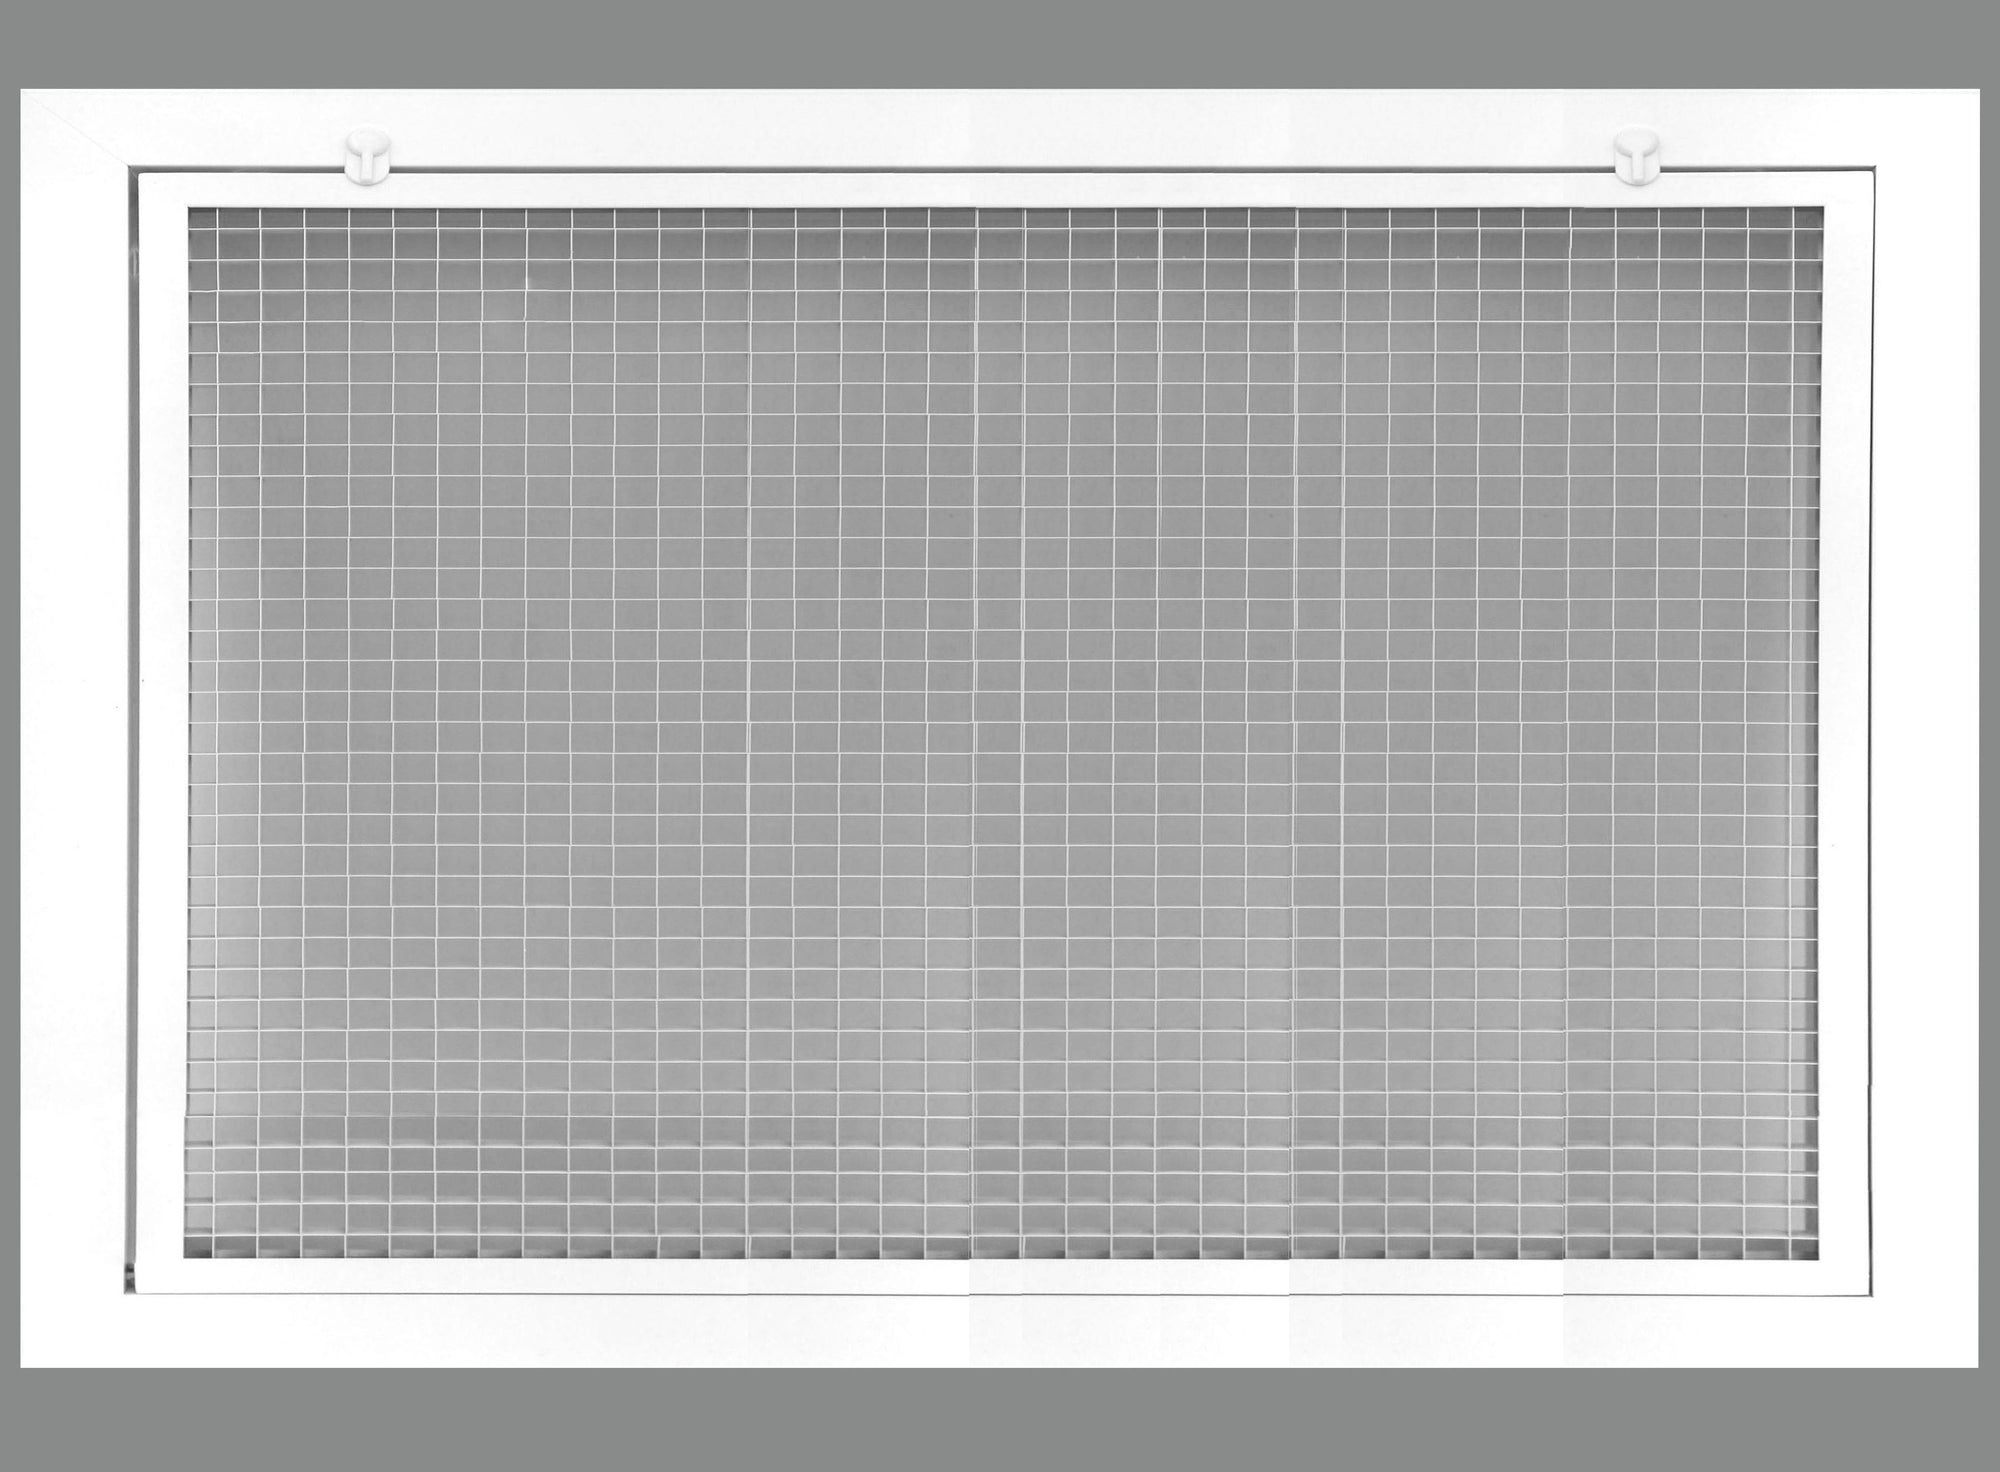 28" x 22" Cube Core Eggcrate Return Air Filter Grille for 1" Filter